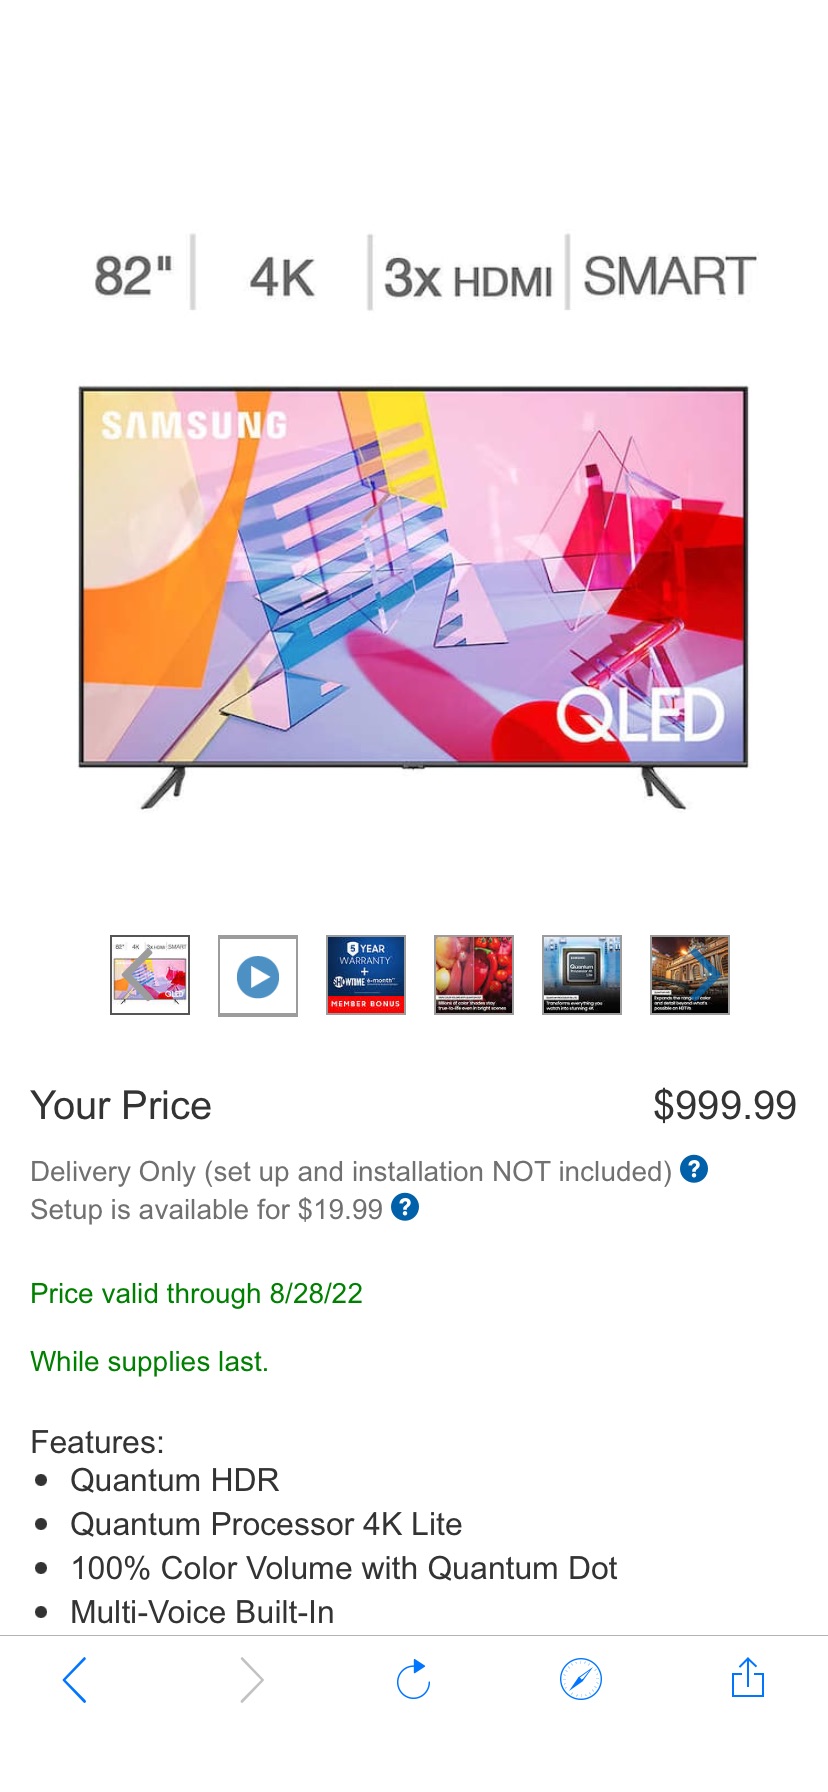 Samsung 82" Class - Q6DT Series - 4K UHD QLED LCD TV - Allstate 3-Year Protection Plan Bundle Included for 5 years of total coverage* | Costco